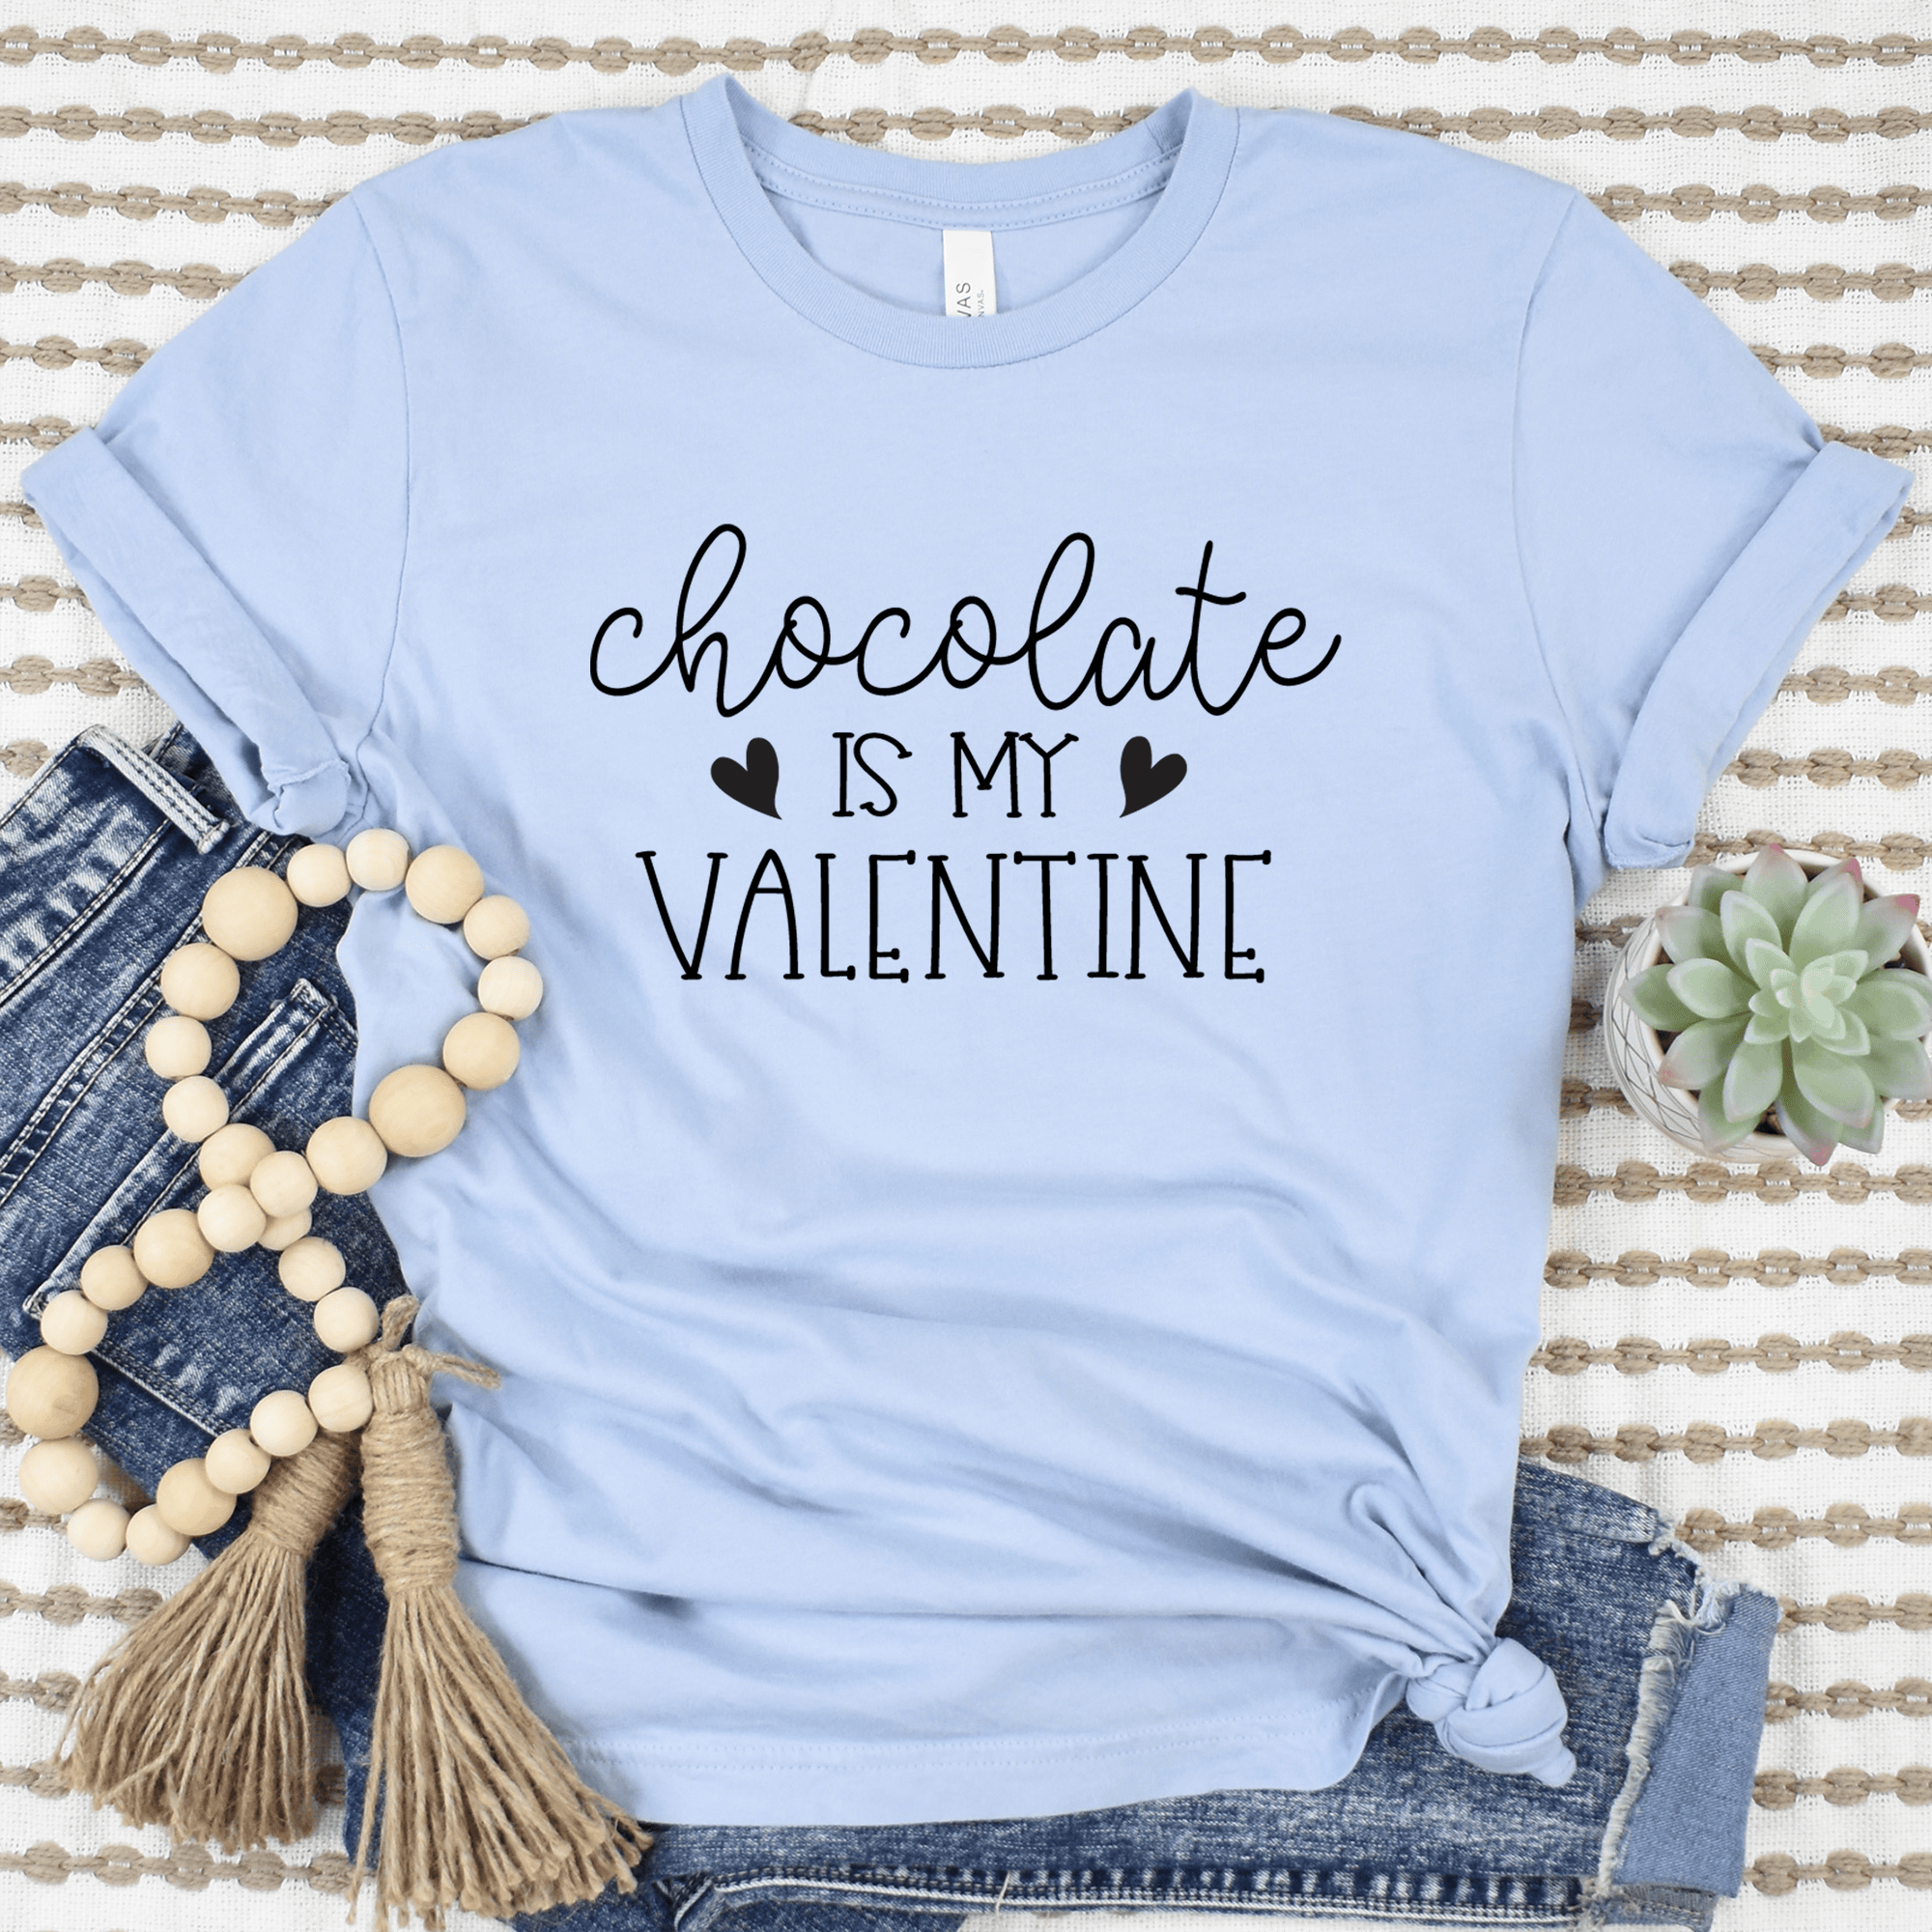 Light Blue Womens T-Shirt With Chocolate Is My Valentine Design